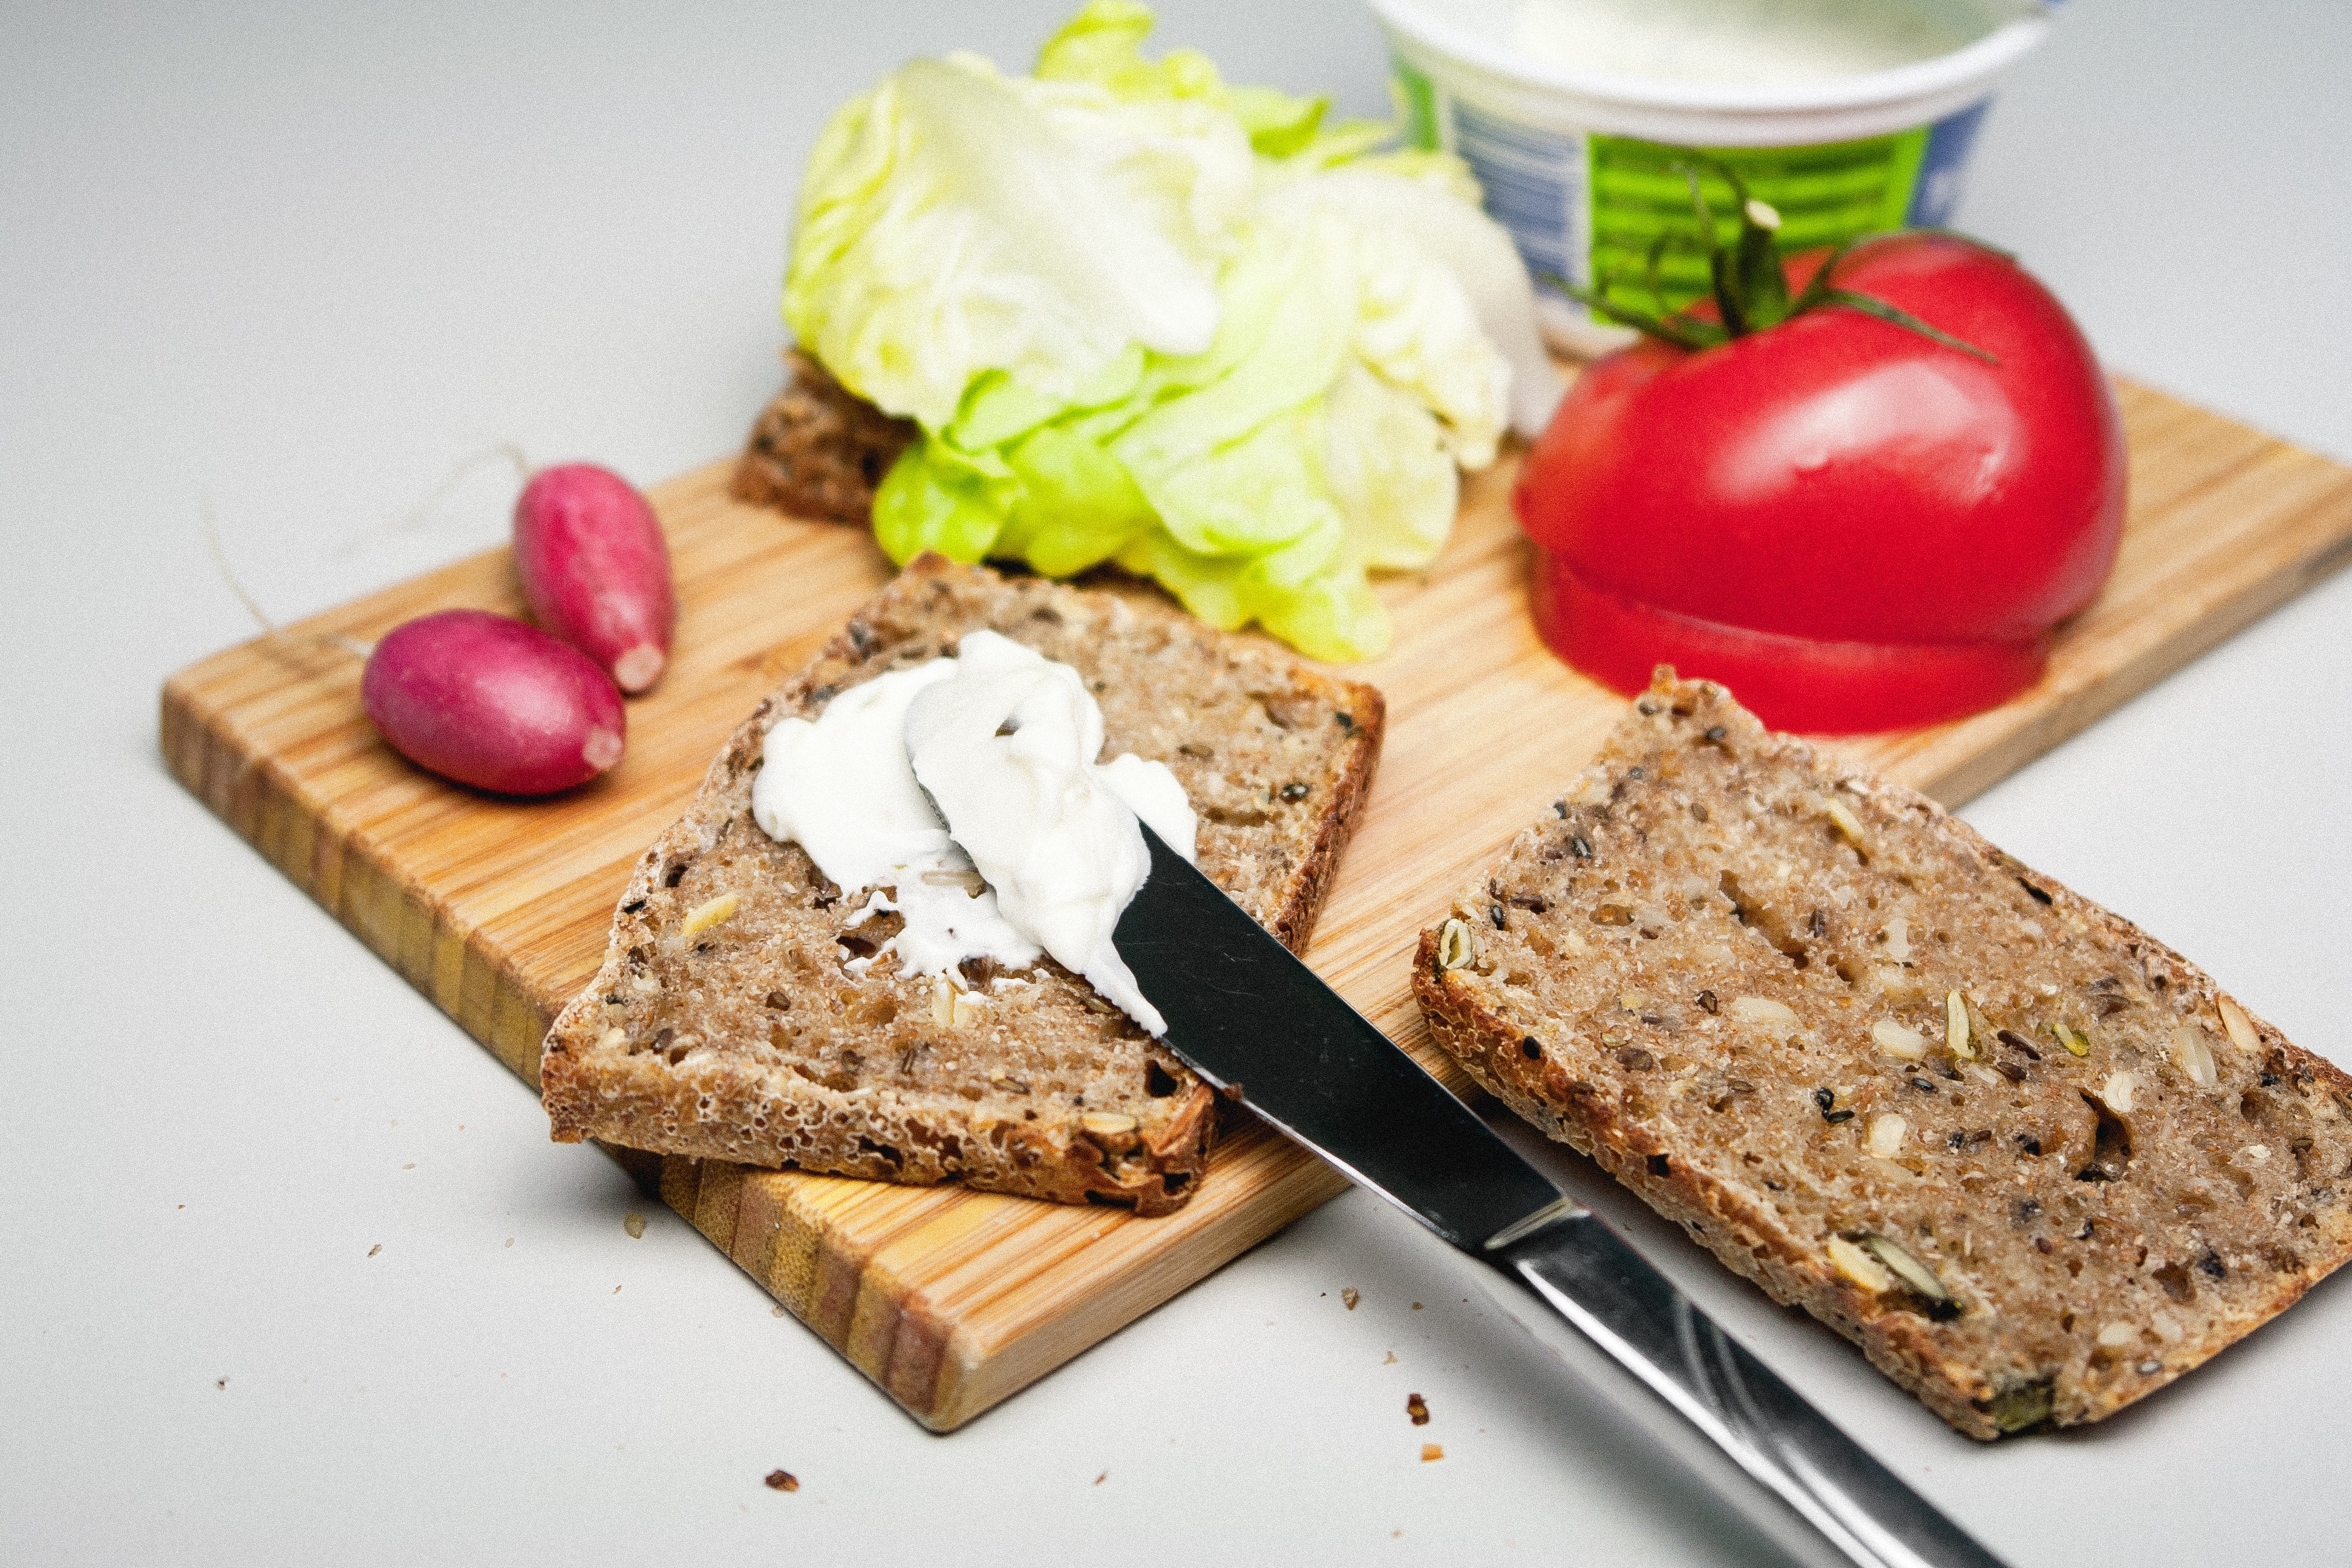 banana cake spread with mayonnaise and vegetables